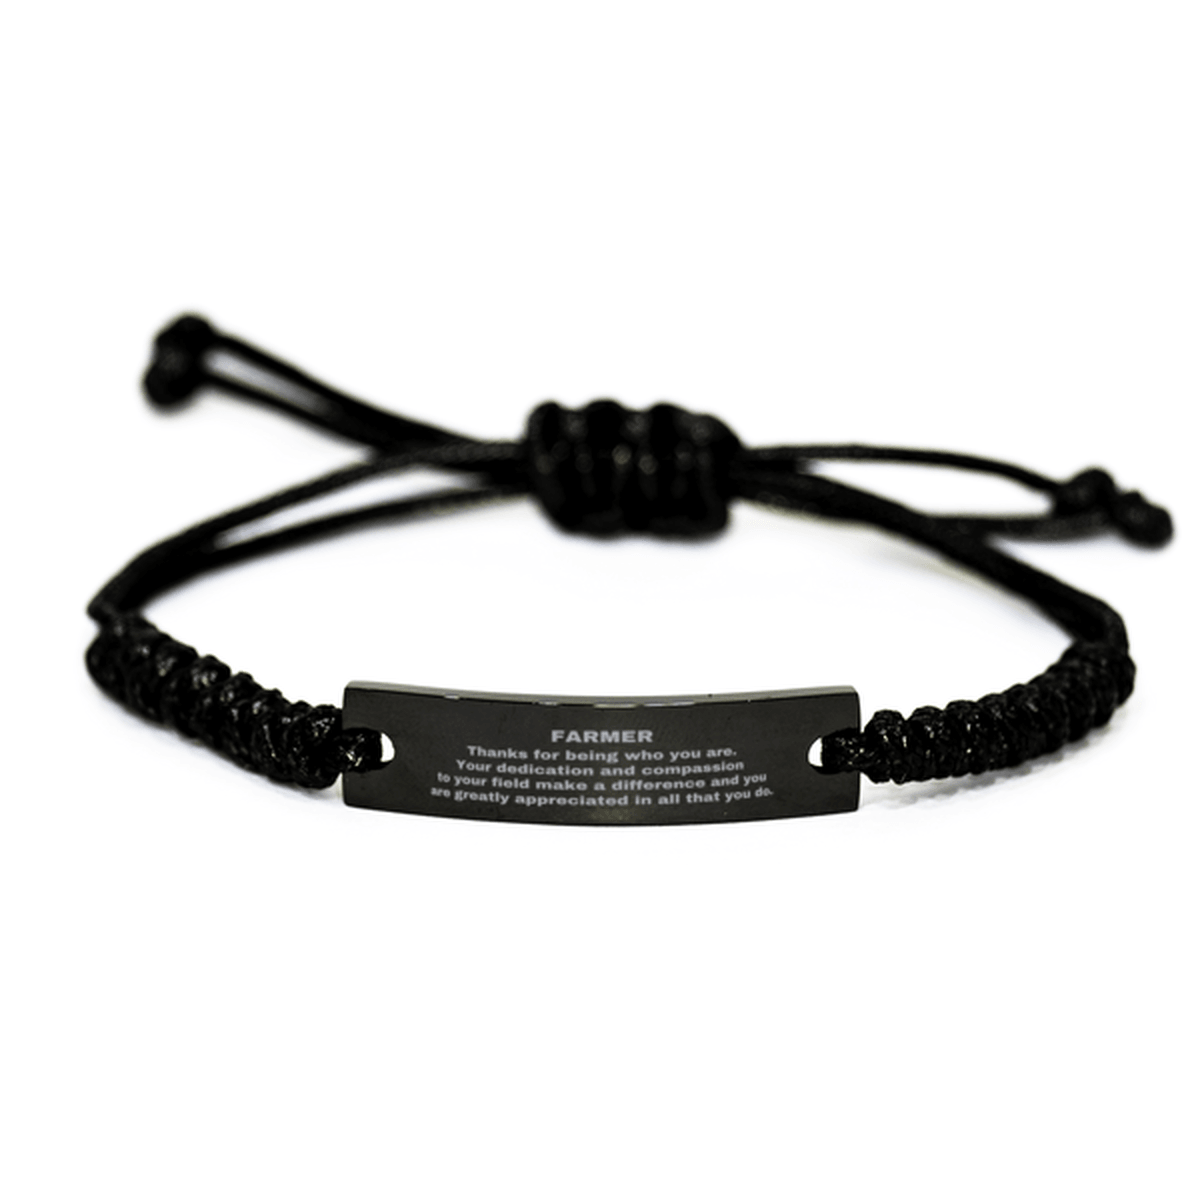 Farmer Black Braided Leather Rope Engraved Bracelet - Thanks for being who you are - Birthday Christmas Jewelry Gifts Coworkers Colleague Boss - Mallard Moon Gift Shop